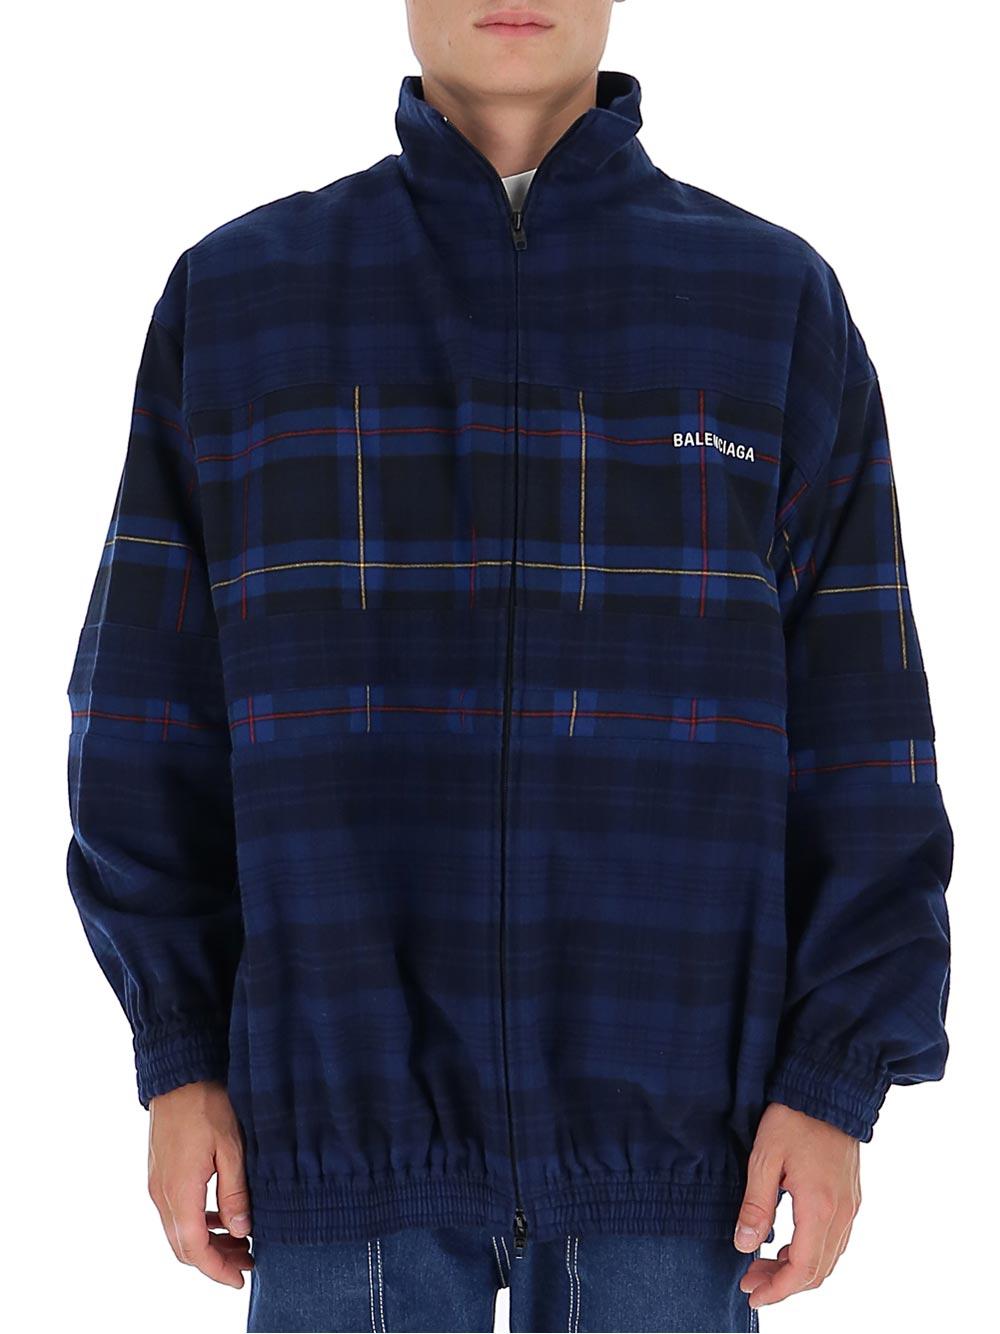 Balenciaga Plaid Zip-up Jacket in Blue for Men | Lyst